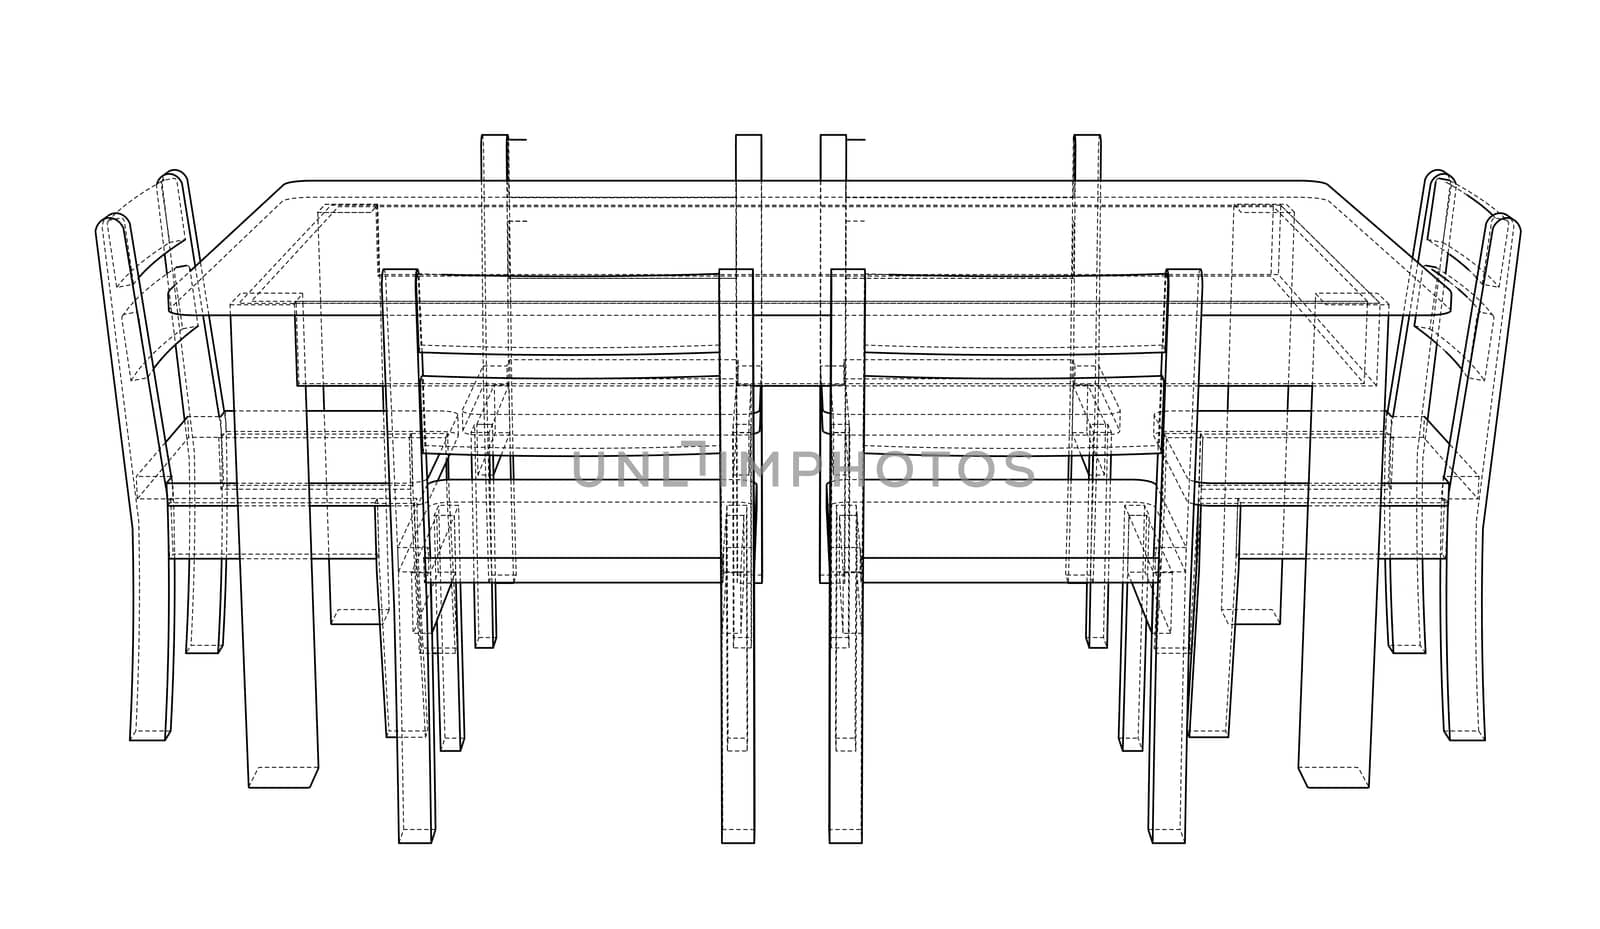 Table with chairs for 6 people. 3d illustration. Wire-frame style